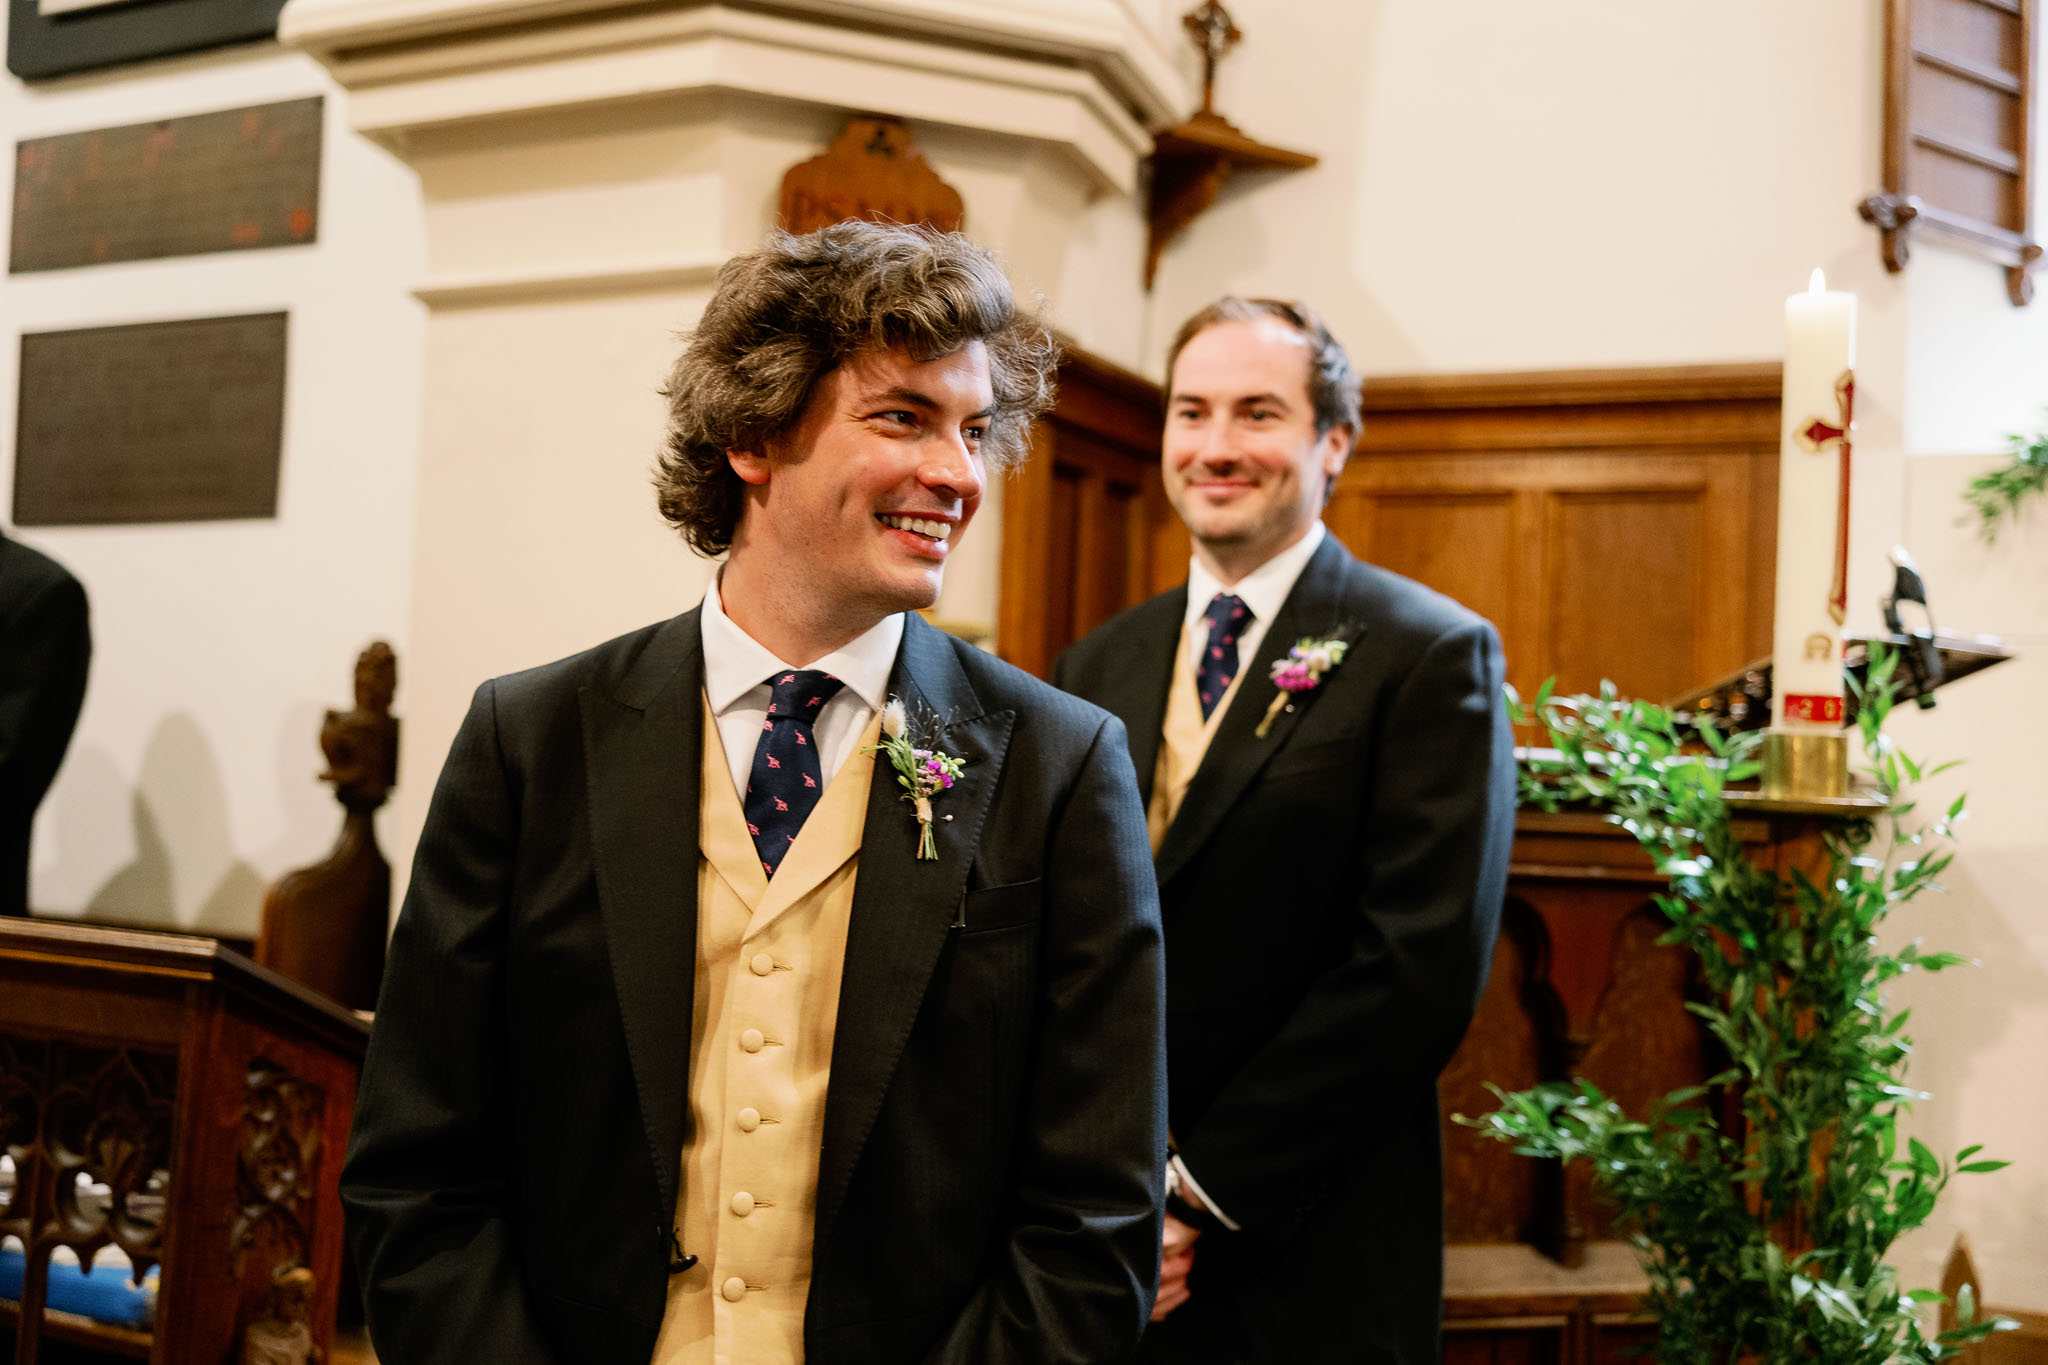 Groom sees bride for first time at a church wedding 